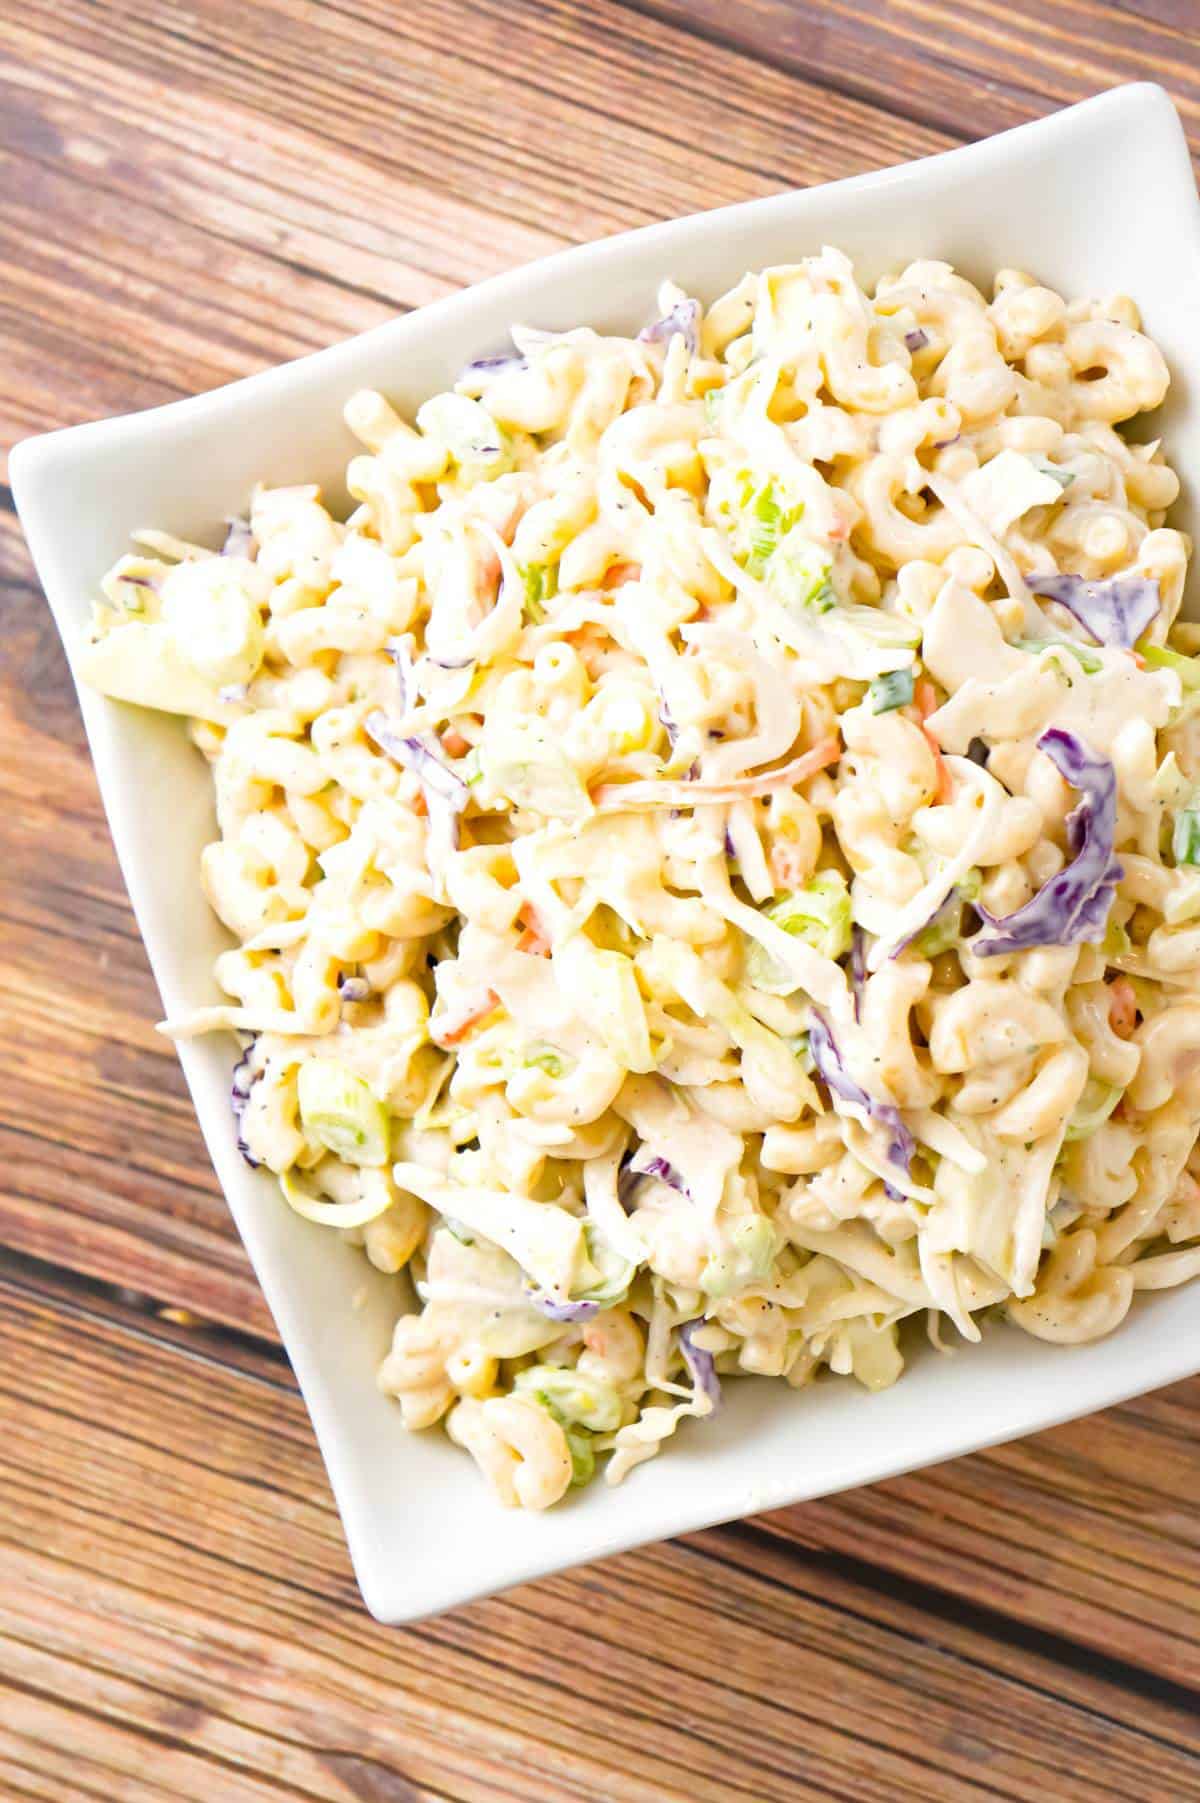 Coleslaw Macaroni Salad is a simple cold side dish recipe perfect for summer barbecues and potlucks.